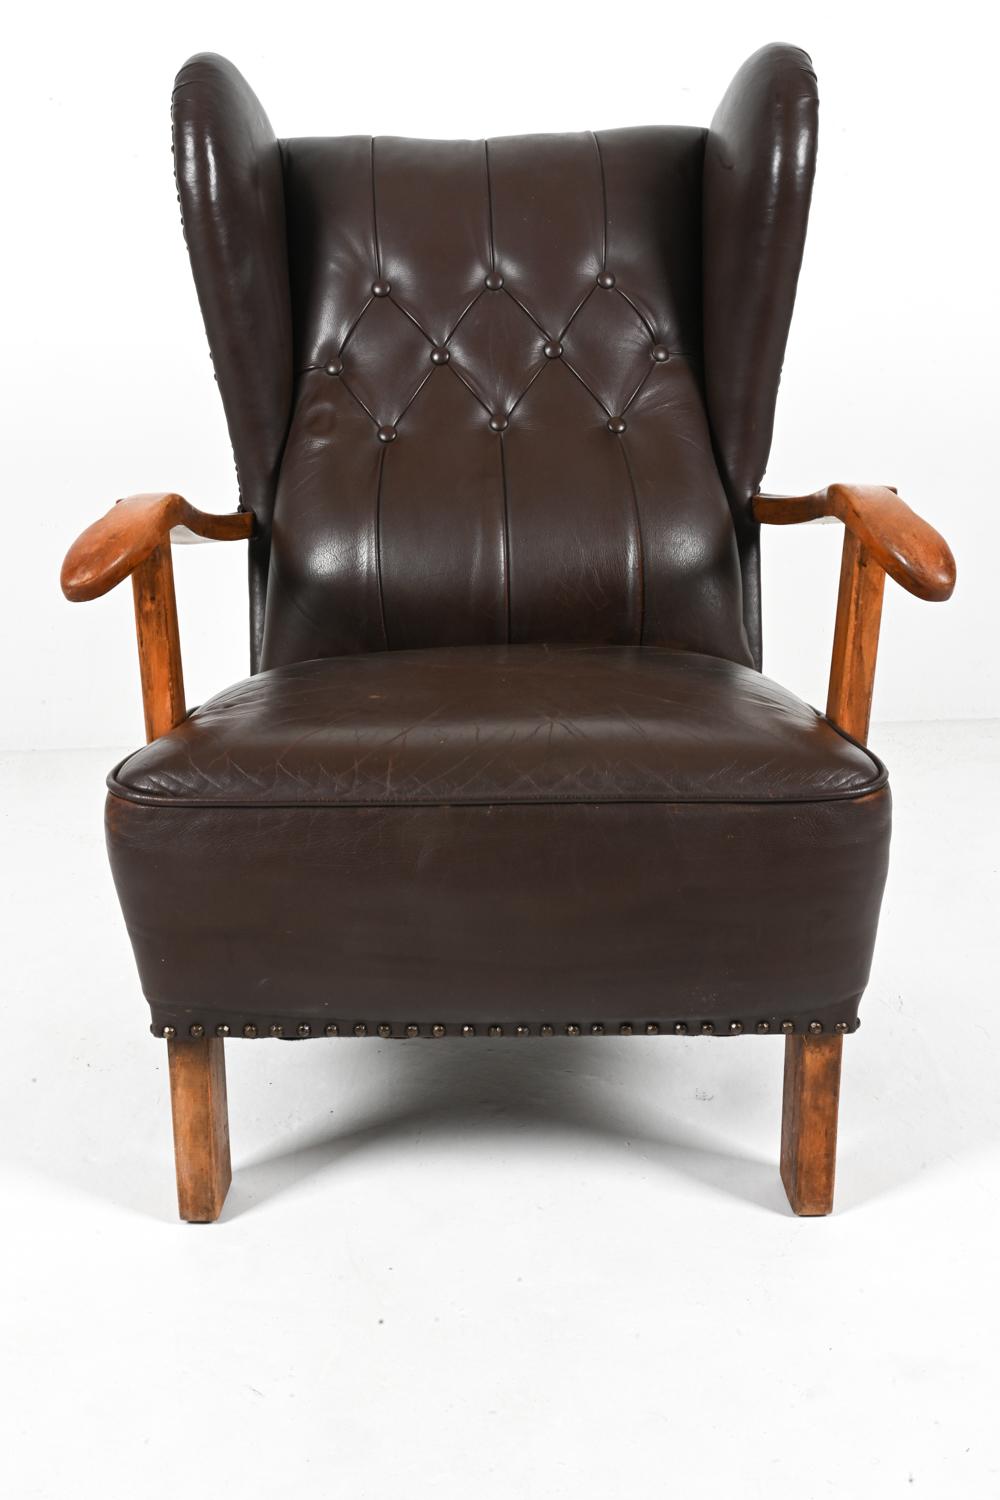 Fritz Hansen Model 1582 Wingback Lounge Chair in Beech & Leather, c. 1940's For Sale 1